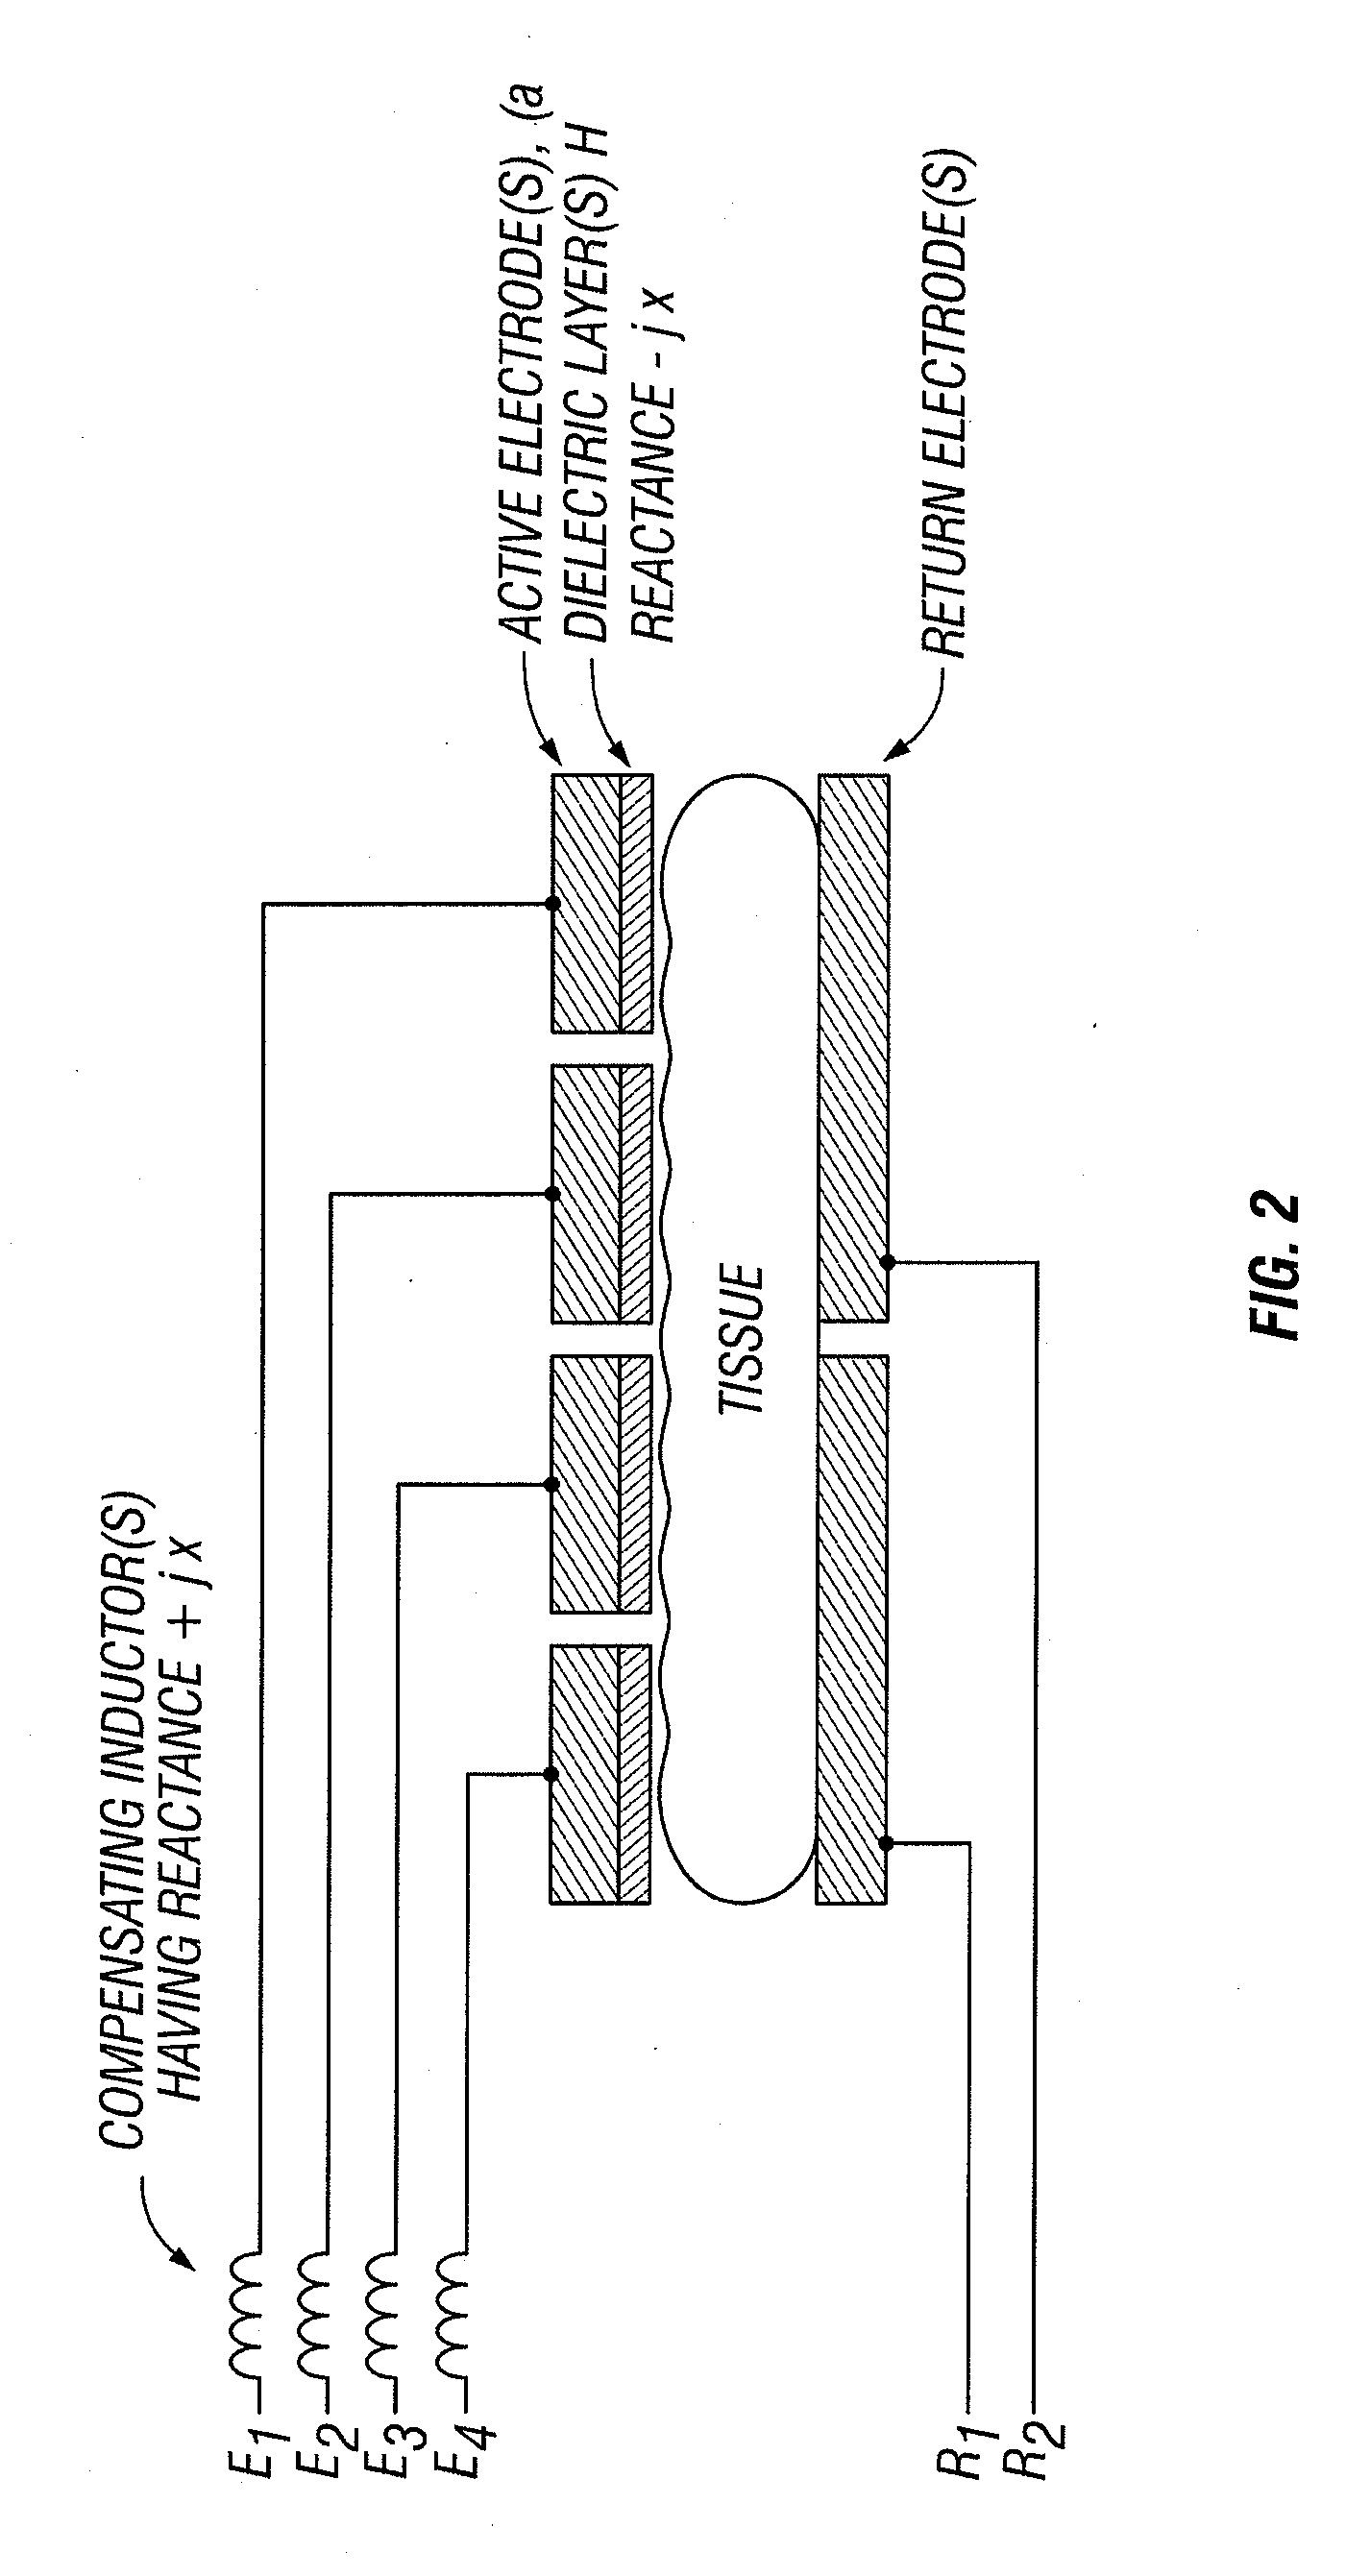 Electrocautery method and apparatus